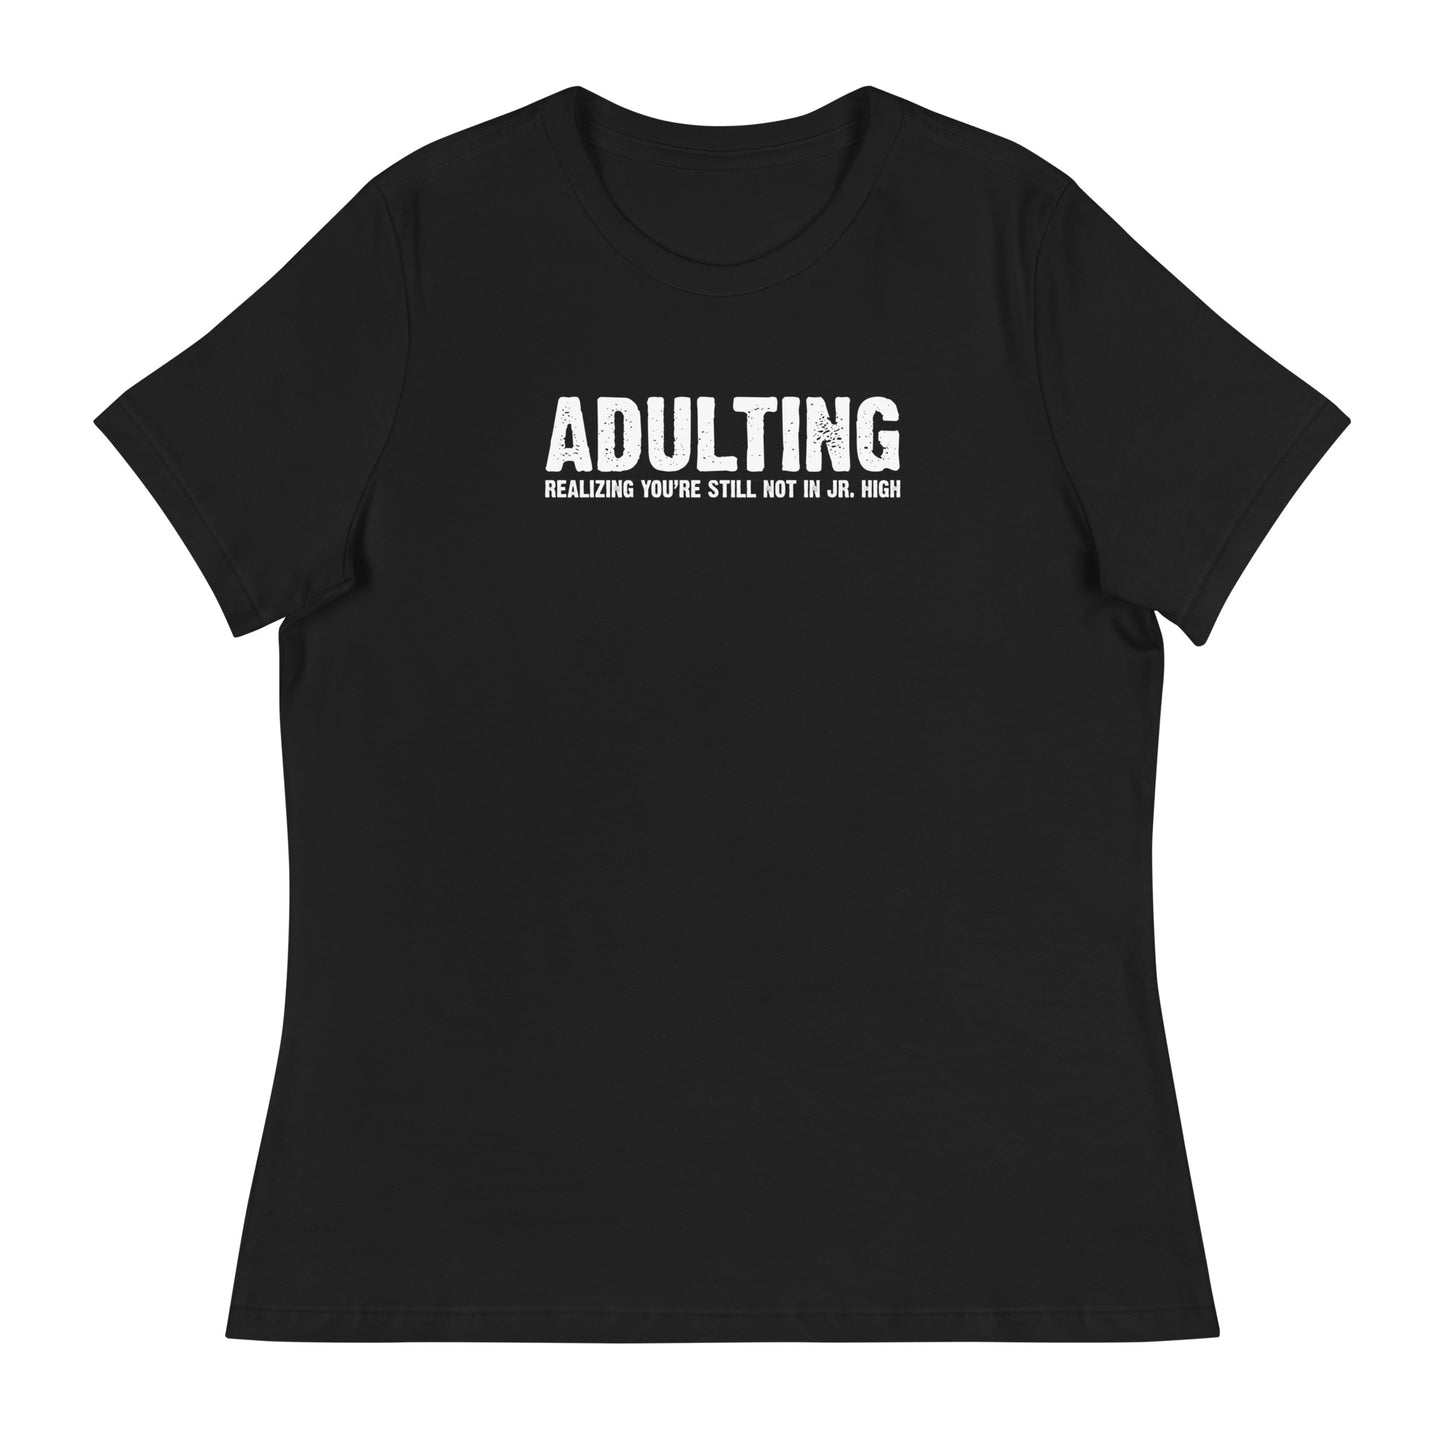 Women's - Adulting, Realizing you're not still in Jr. High - Funny T-Shirt